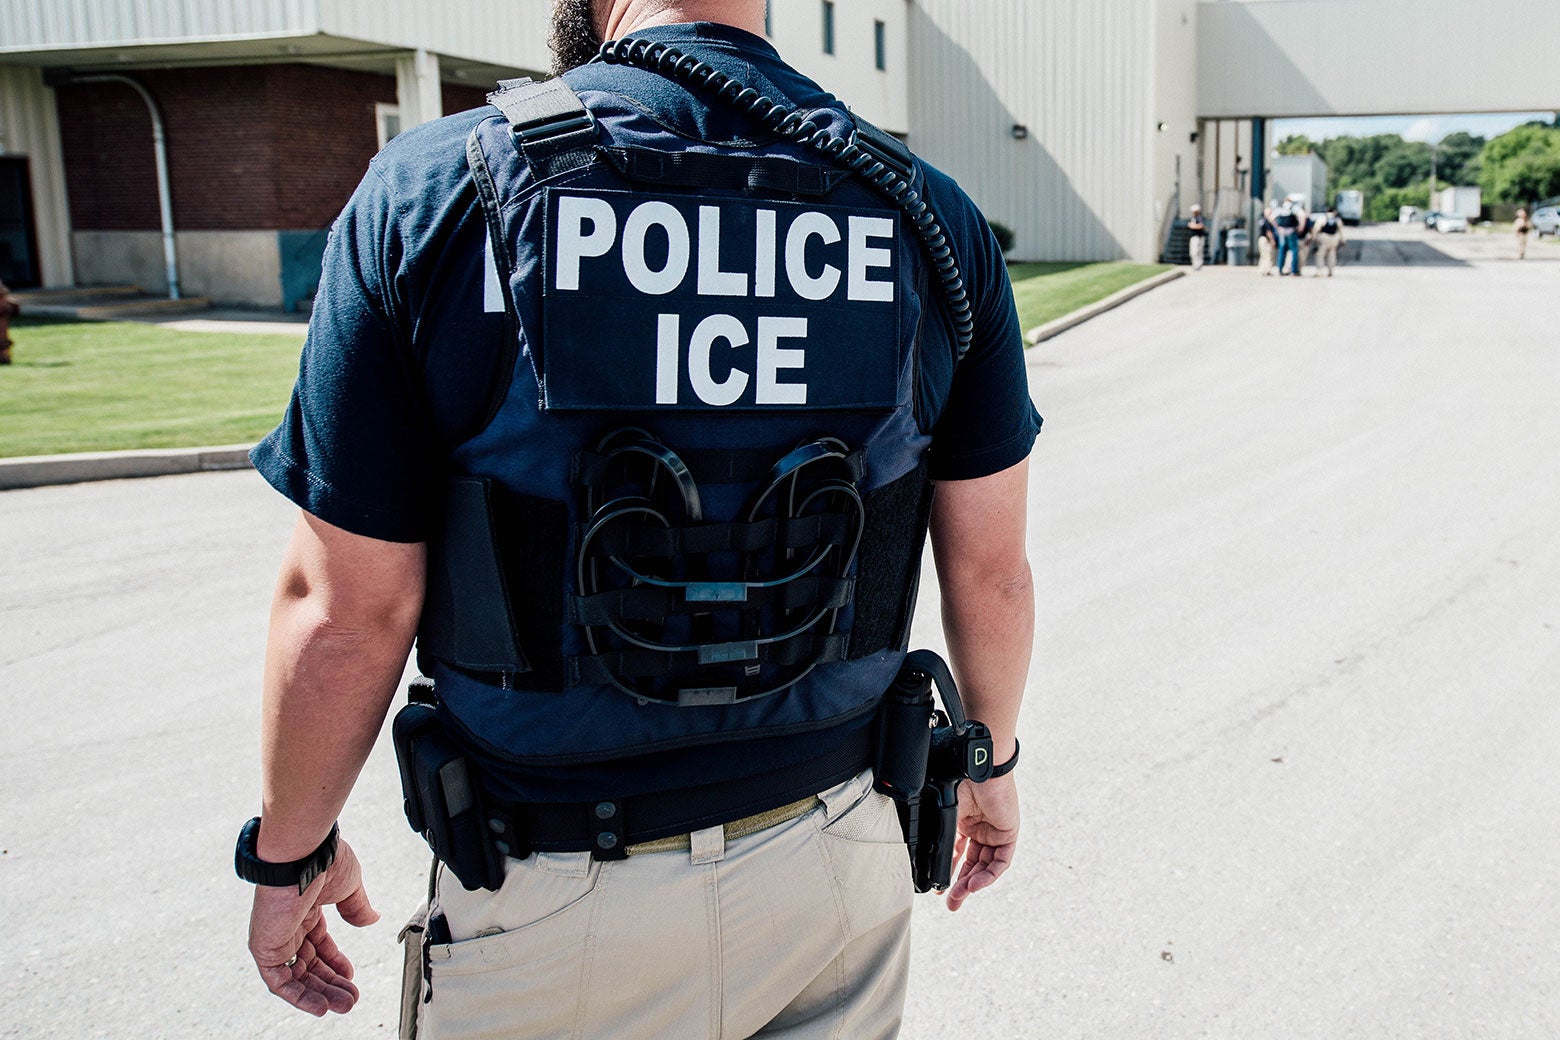 An Immigration and Customs Enforcement special agent prepares to arrest alleged immigration violators at Fresh Mark in Salem, Ohio on June 19.